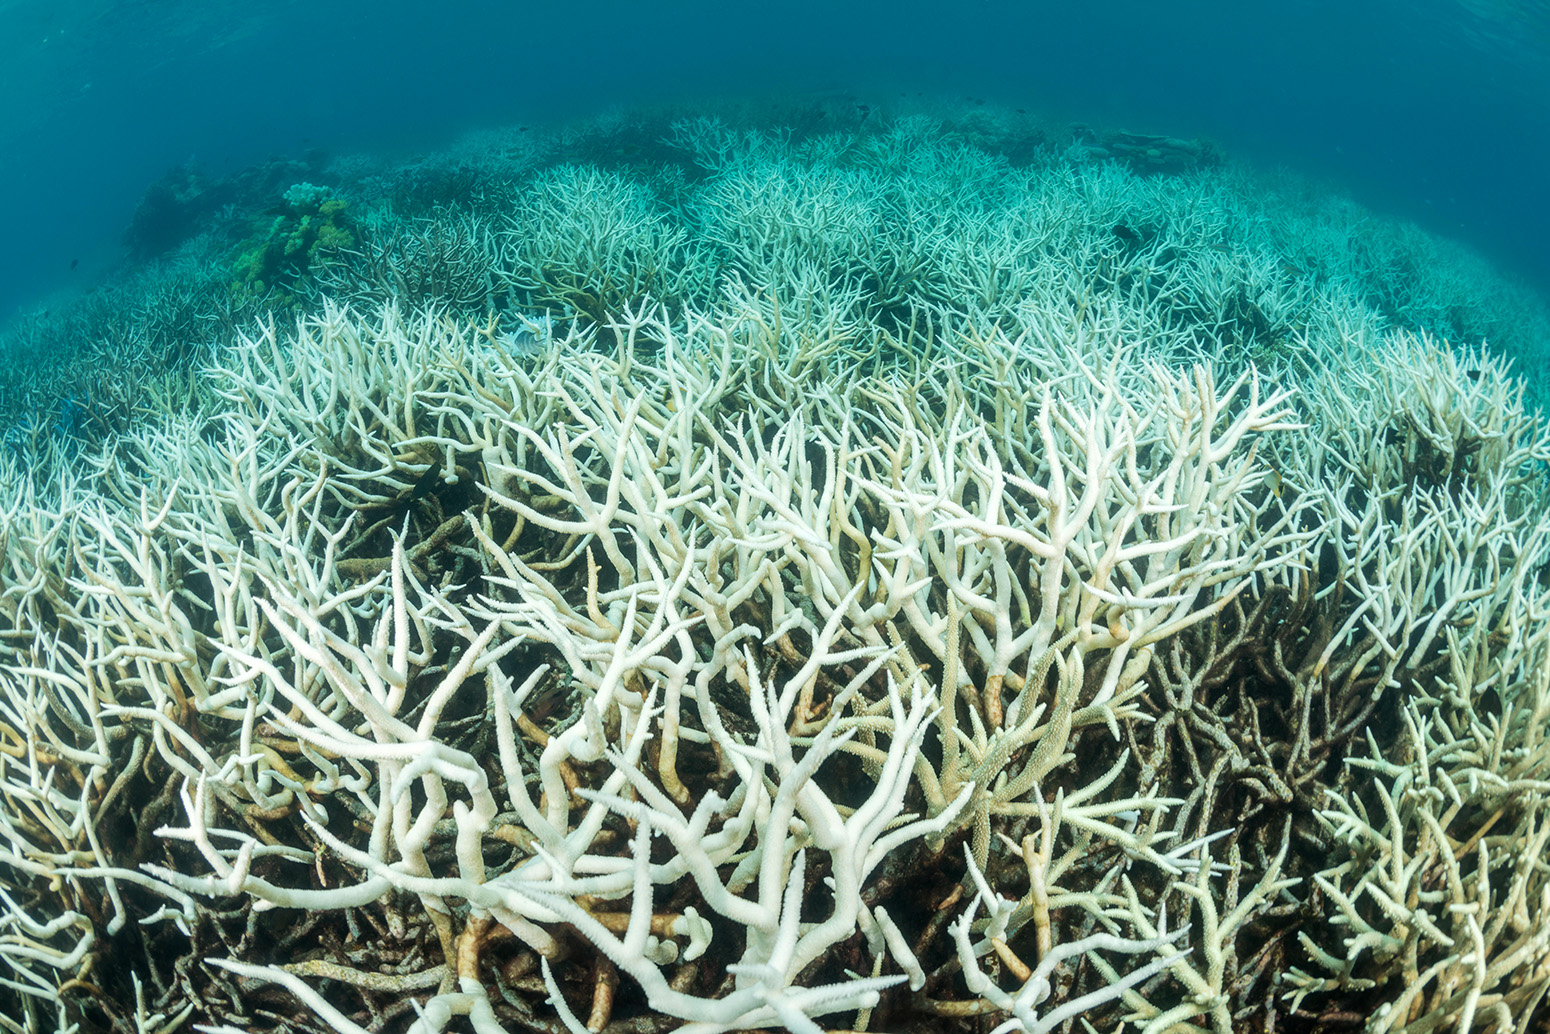 Coral bleaching in the northern Great Barrier Reef, Queensland, Australia, March 2017. Credit: Nature Picture Library / Alamy Stock Photo. 2AADK25